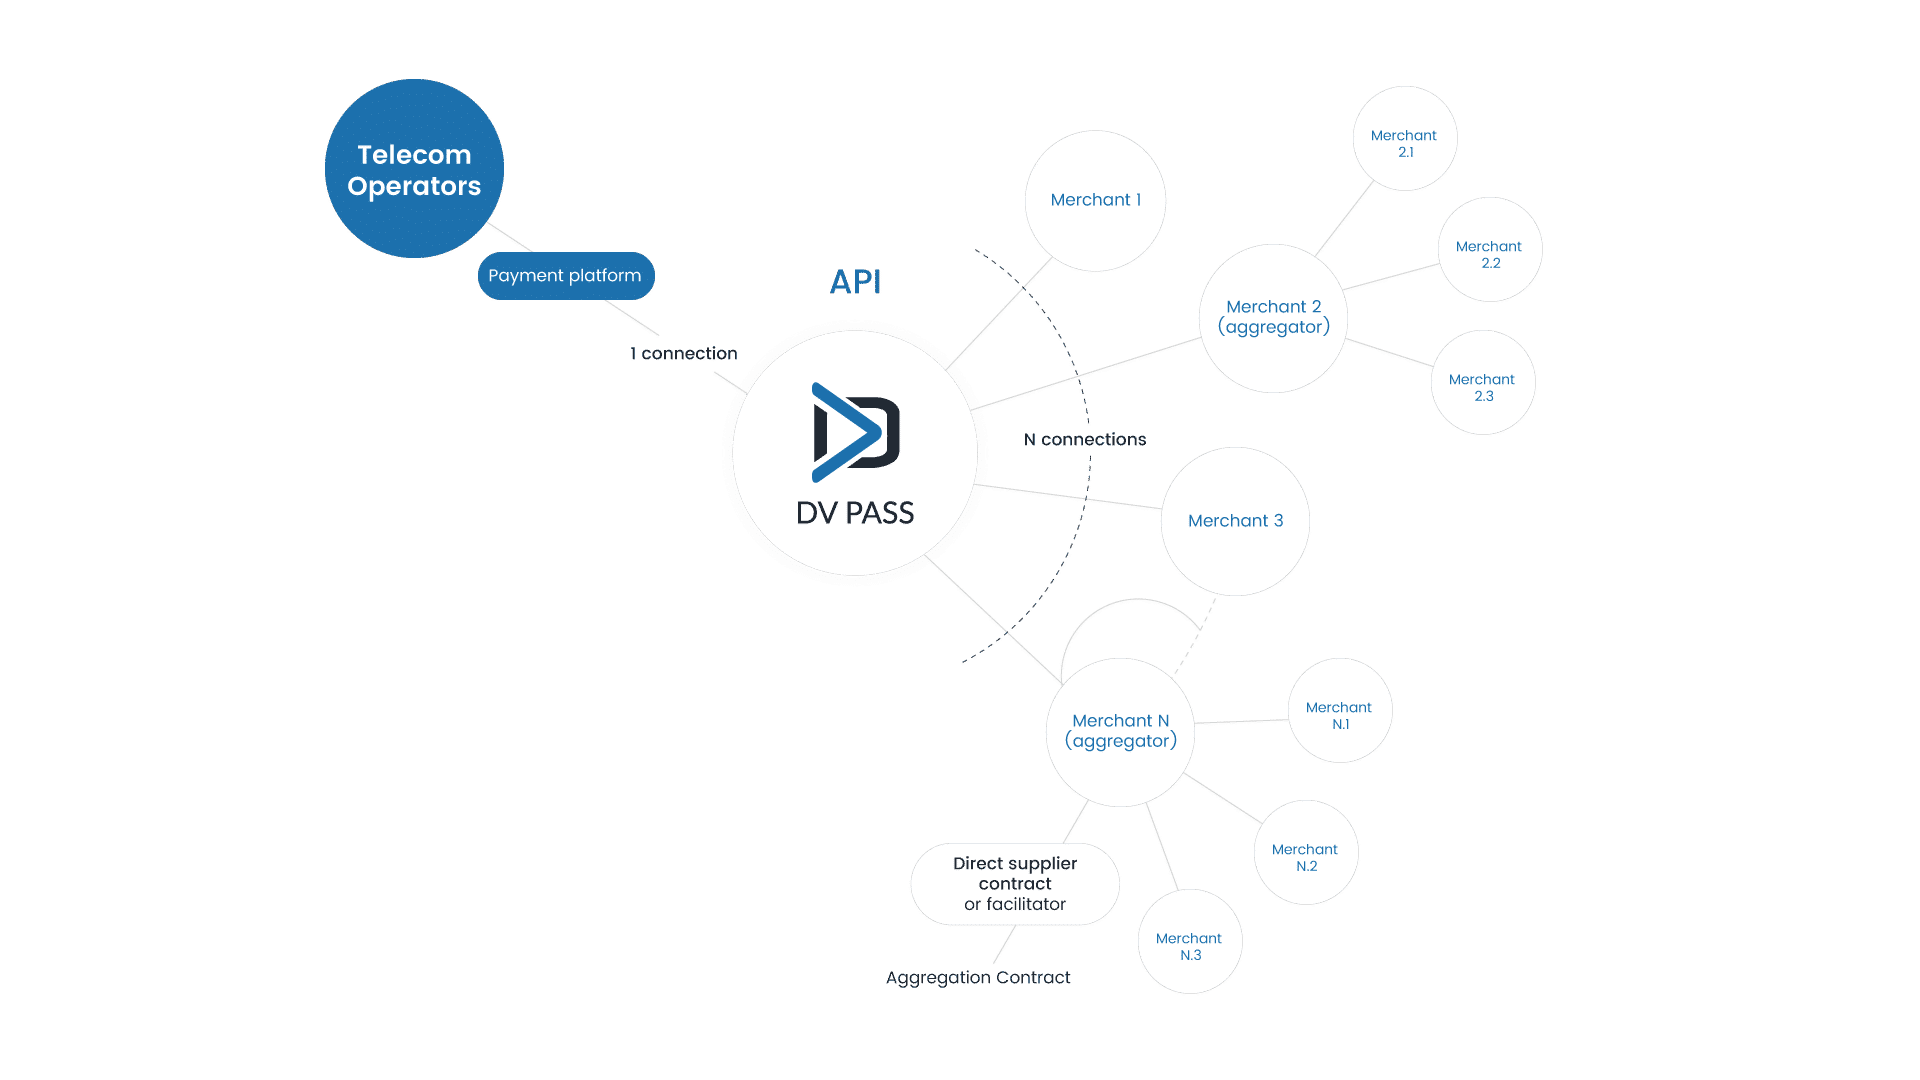 Chart showing DV Pass API and connections with telecom operators and merchants